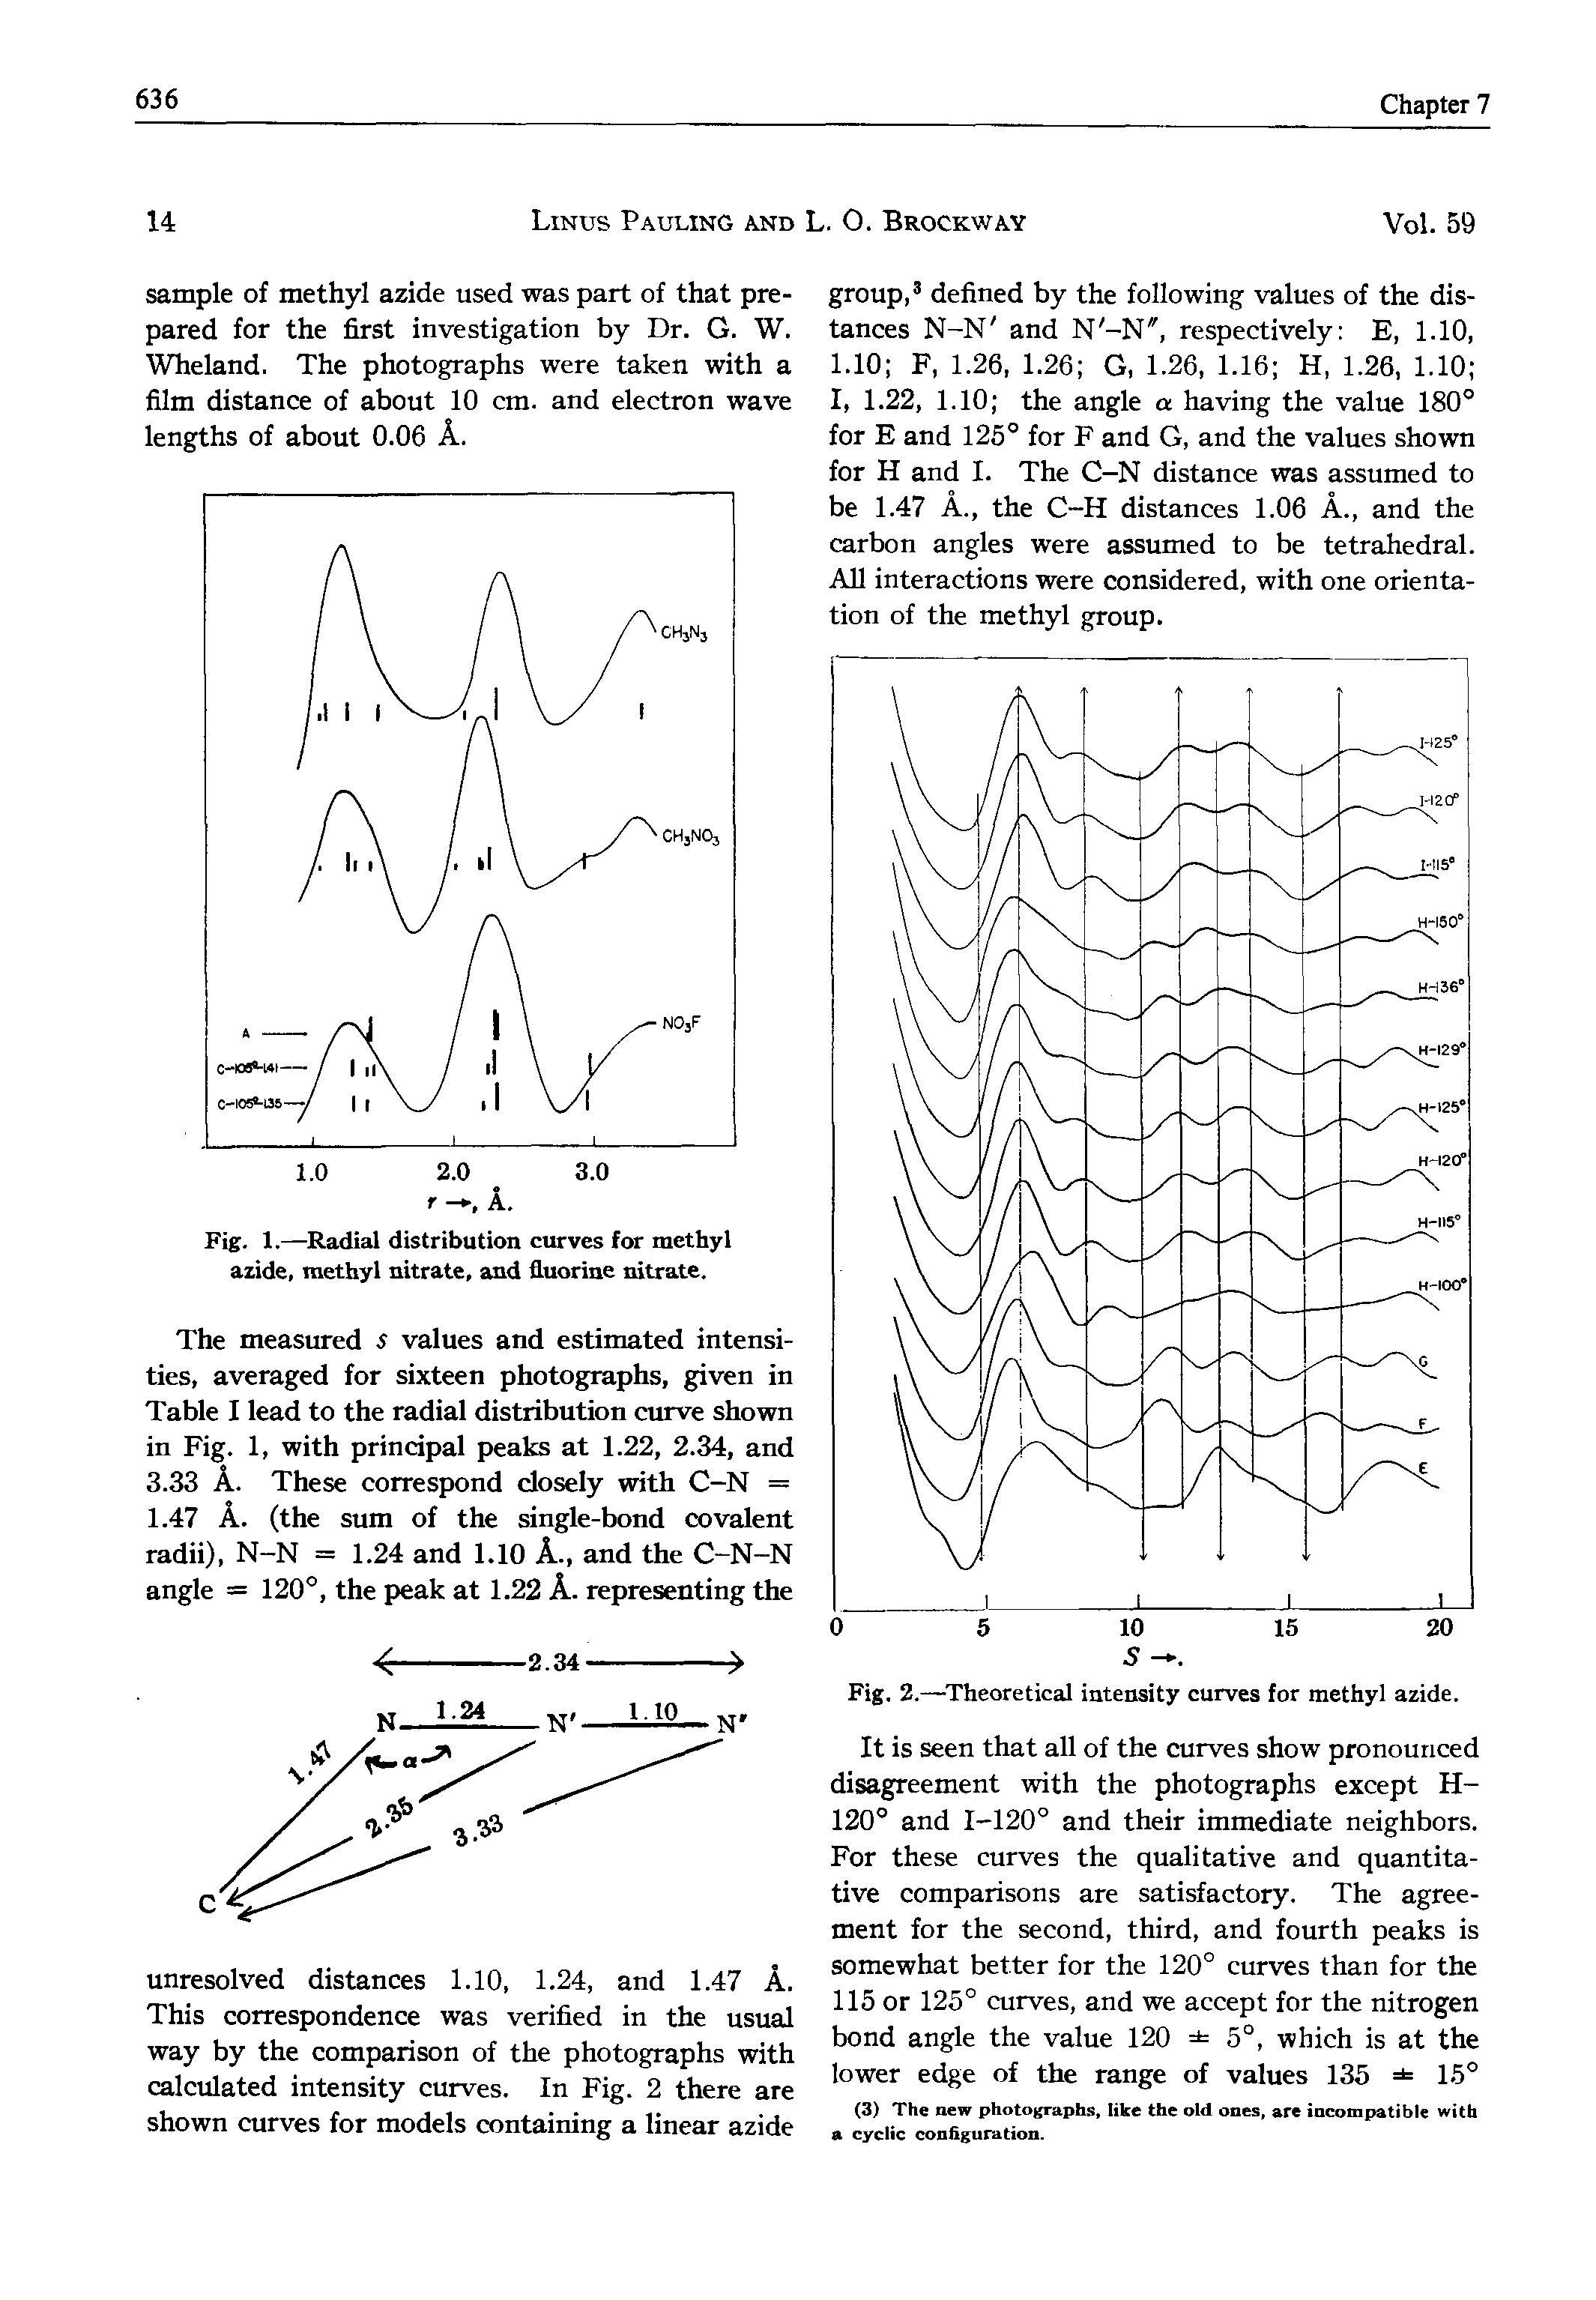 Fig. 1.—Radial distribution curves for methyl azide, methyl nitrate, and fluorine nitrate.